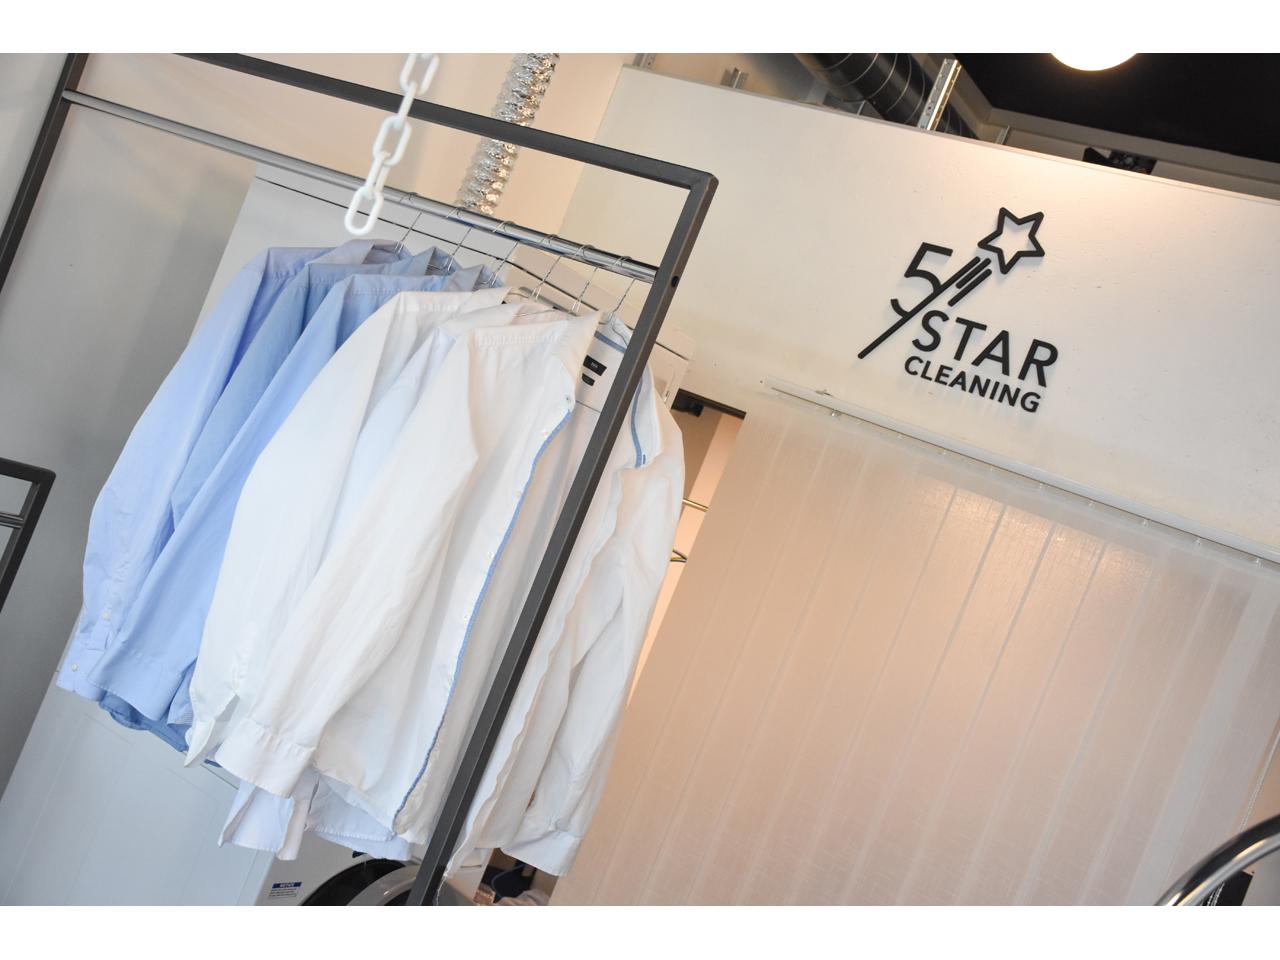 5 STAR CLEANING Dry-cleaning Belgrade - Photo 6